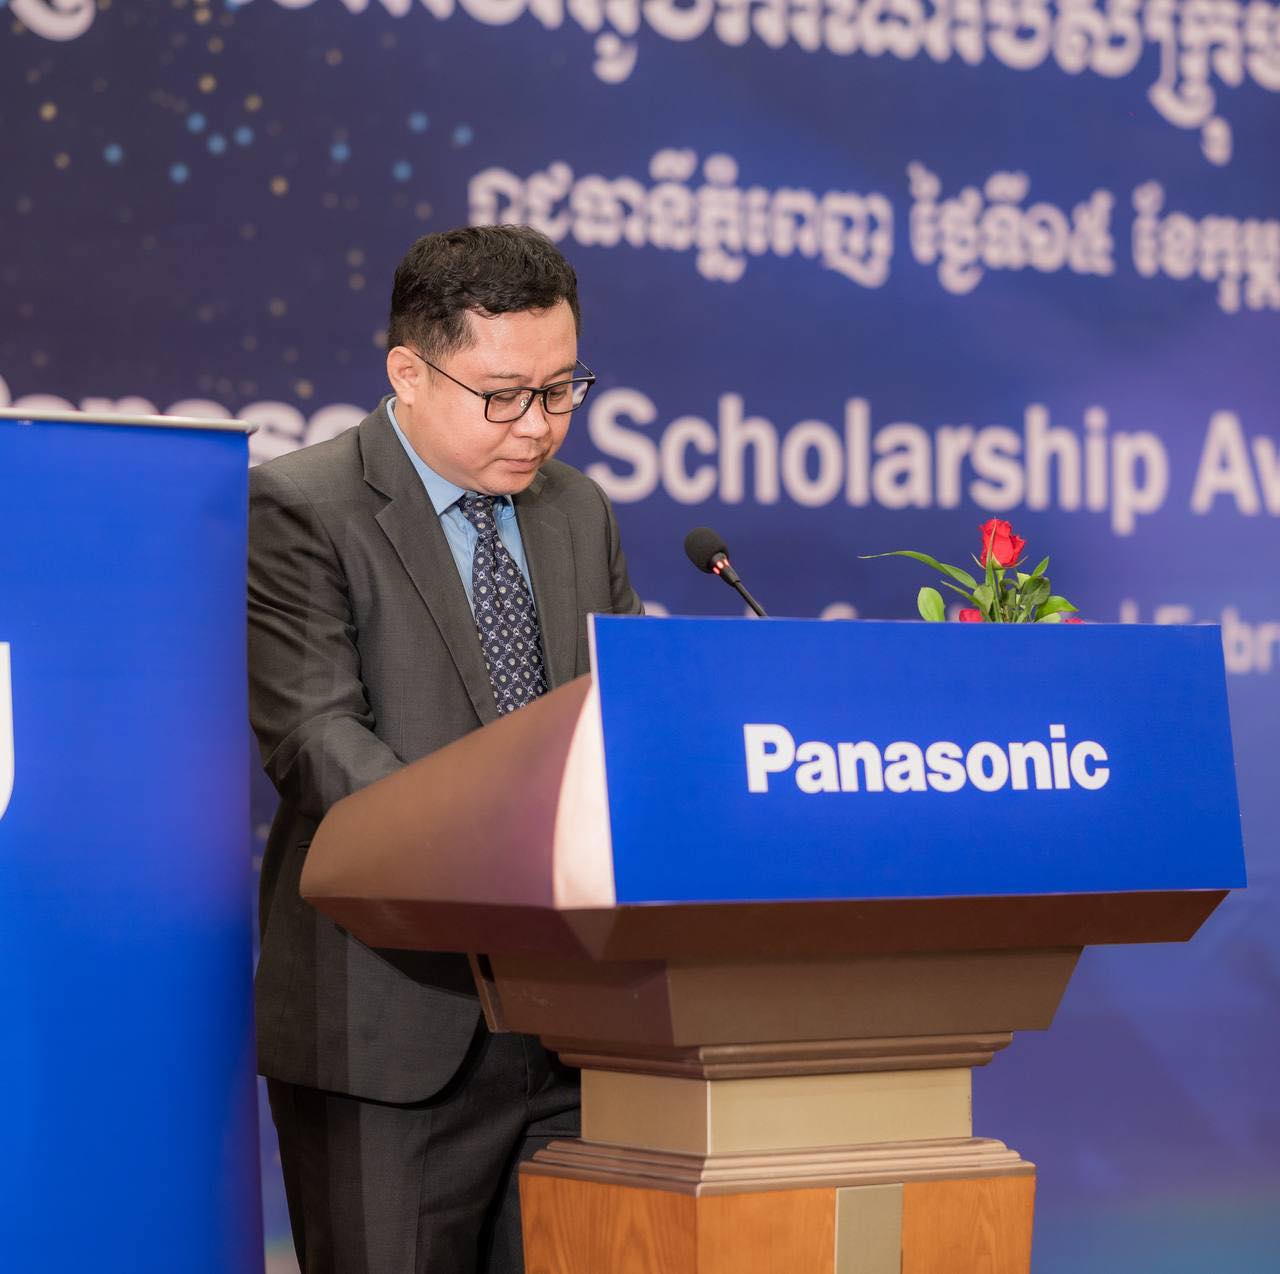 Panasonic Awards Scholarships to Outstanding Students in Cambodia